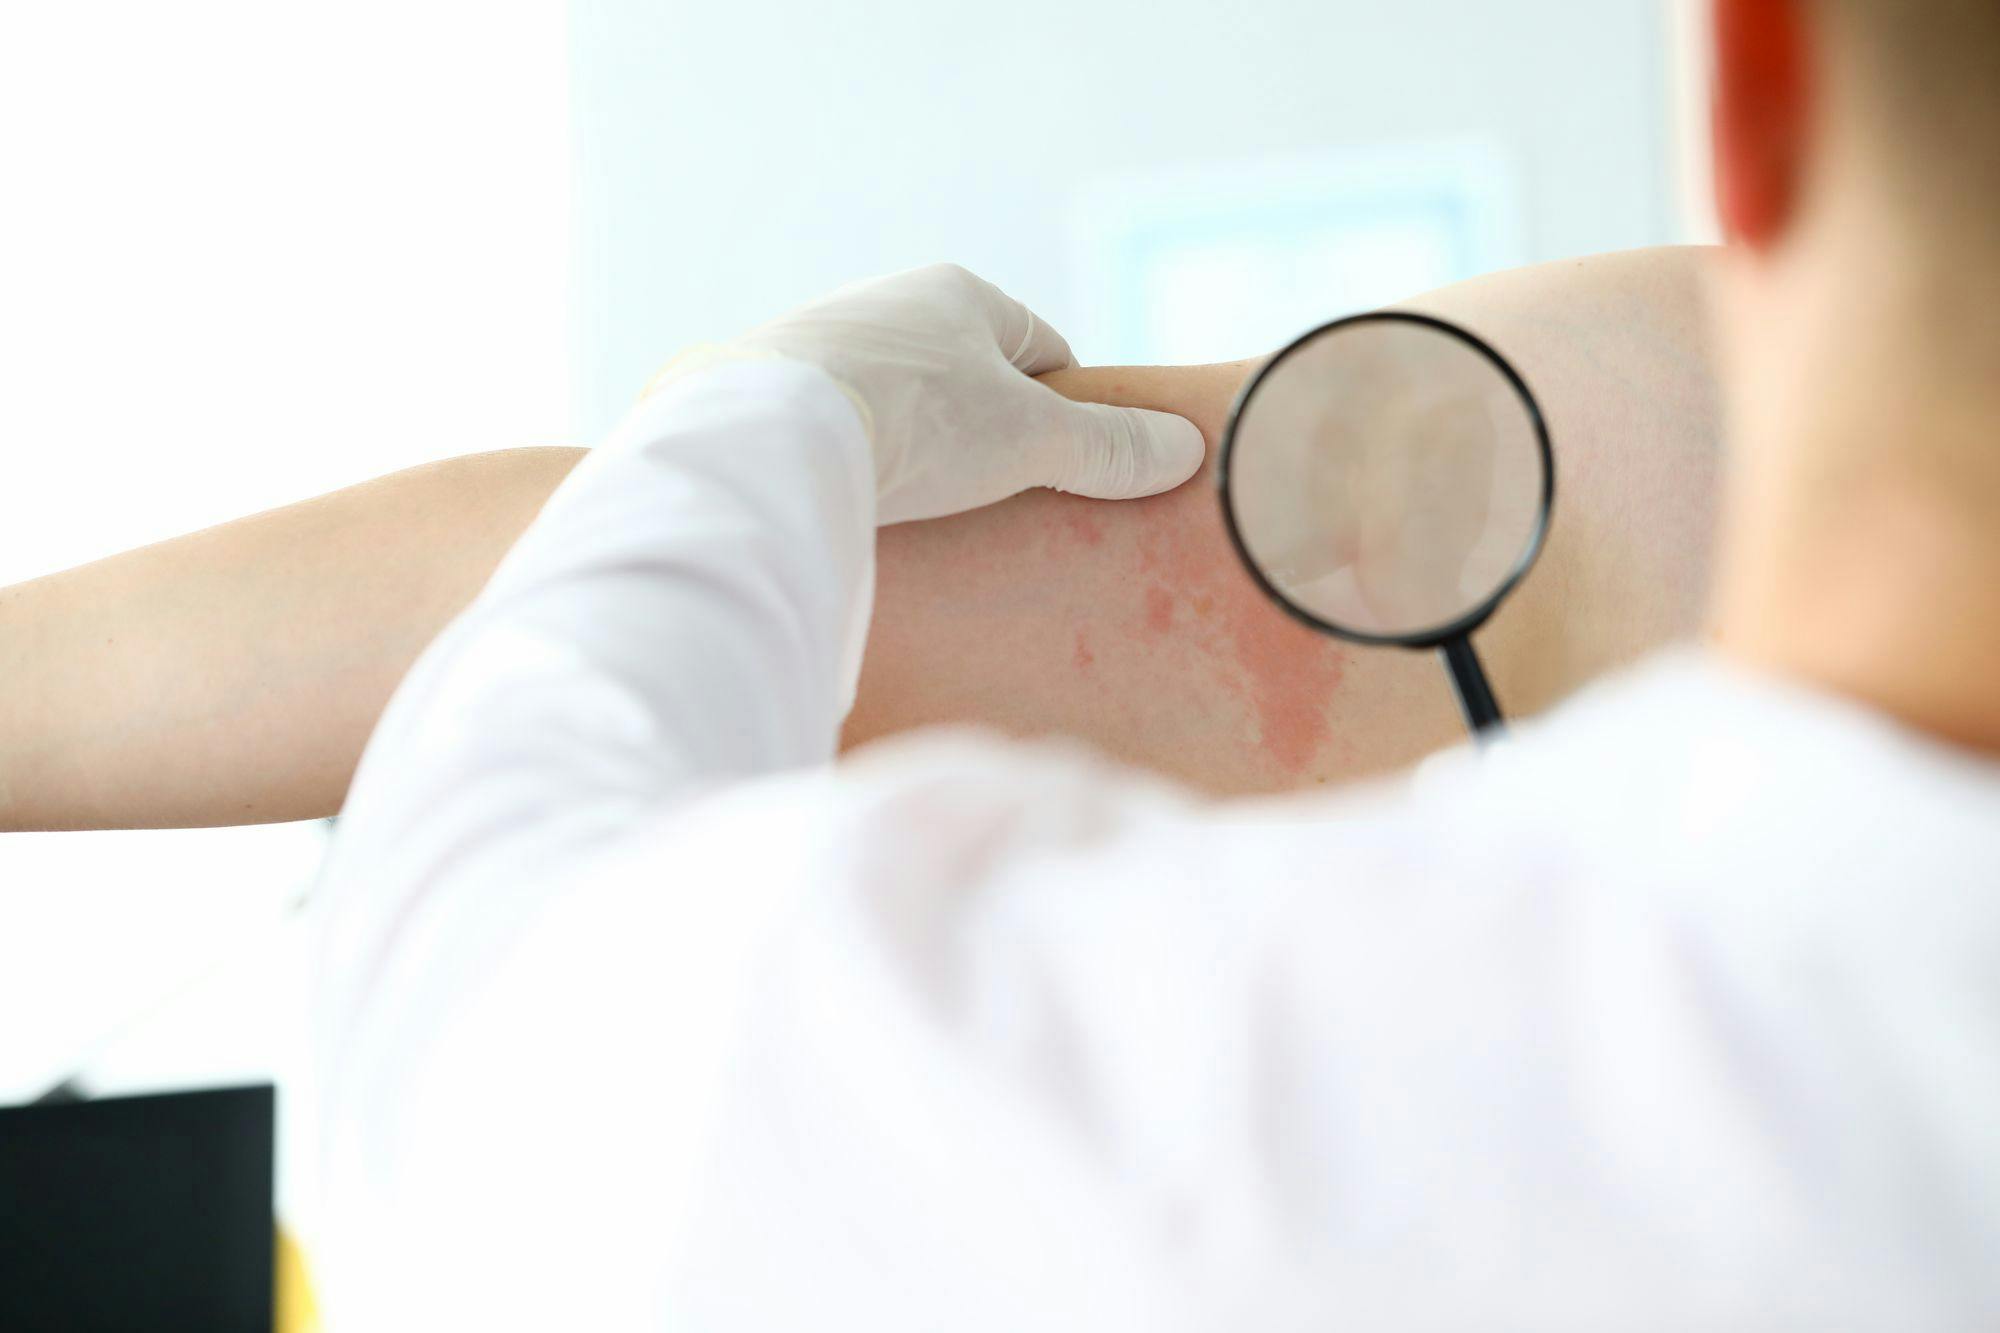 doctor looking at rash on patient's arm using magnifying glass